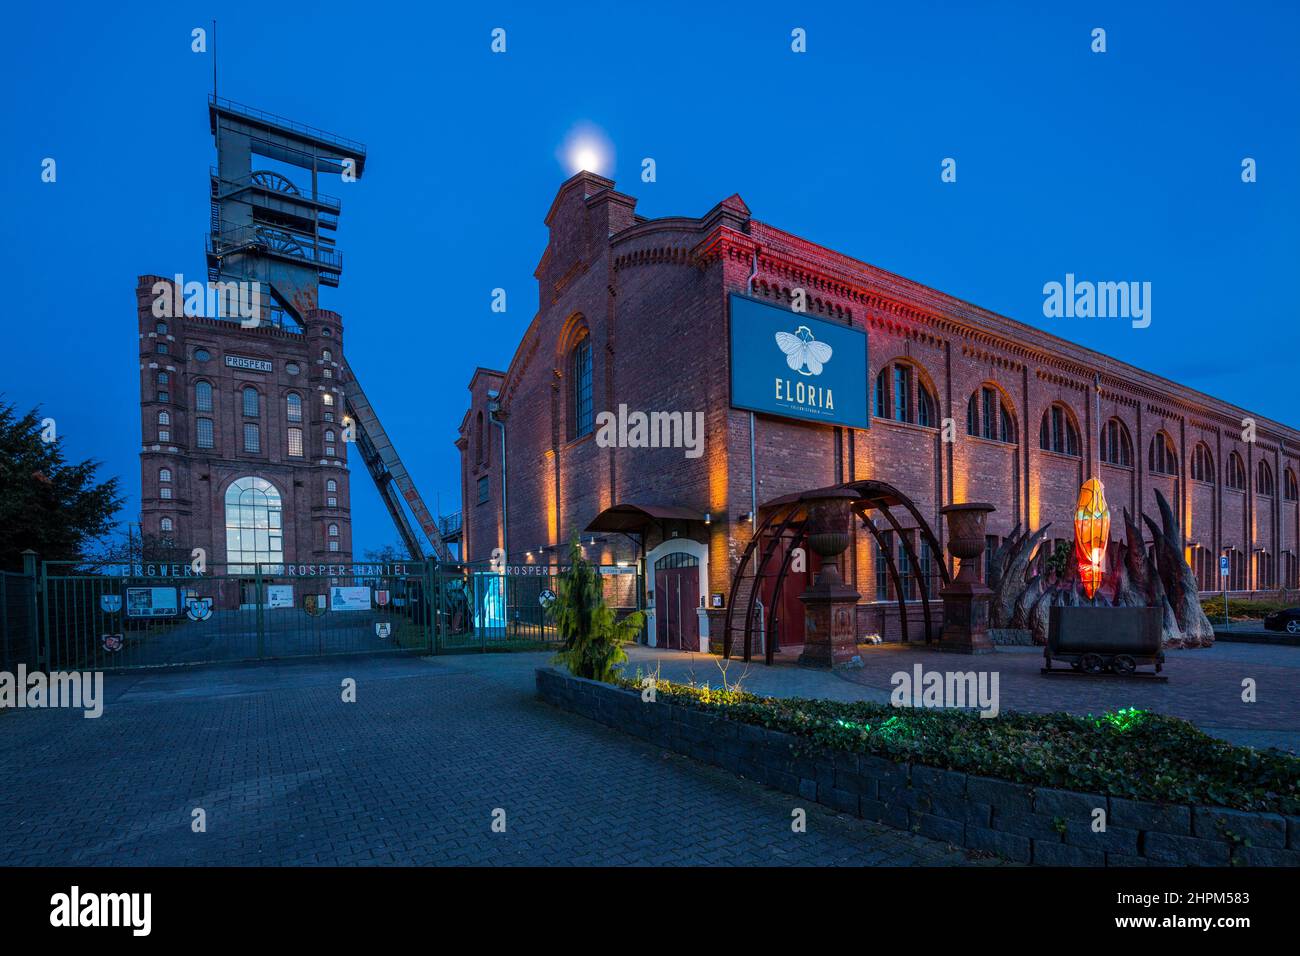 Germany, Bottrop, Ruhr area, Westphalia, North Rhine-Westphalia, NRW, Route of Industrial Heritage, hard coal mining industry, coalmine Prosper-Haniel, shaft tower Prosper II, Malakoff tower with headframe and former pithead bath, nowadays FLORIA adventure factory and catering trade, night photograph Stock Photo